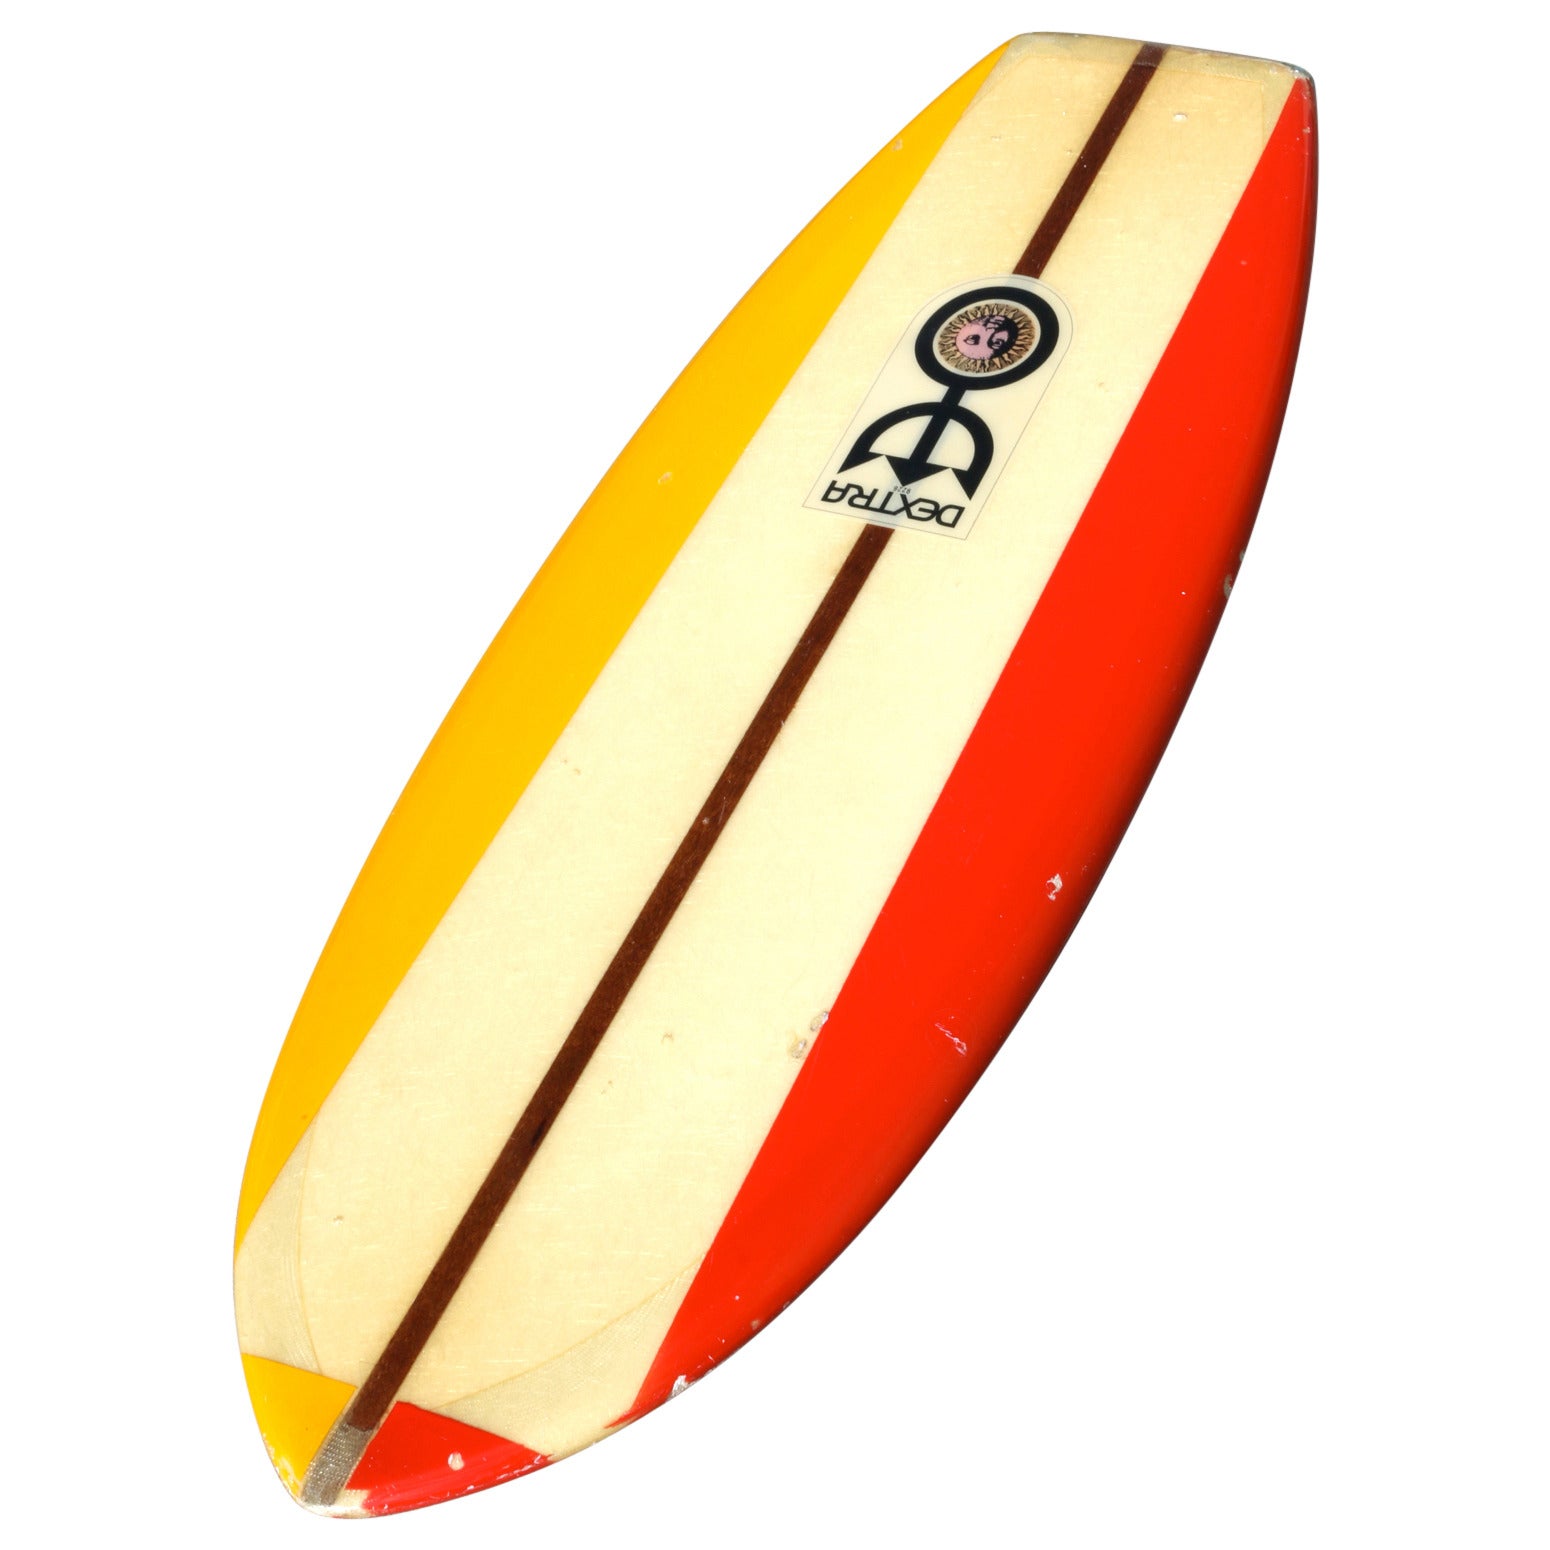 Clear Yellow Red Vintage Dextra Belly Board, California Surfboard Circa 1960s For Sale